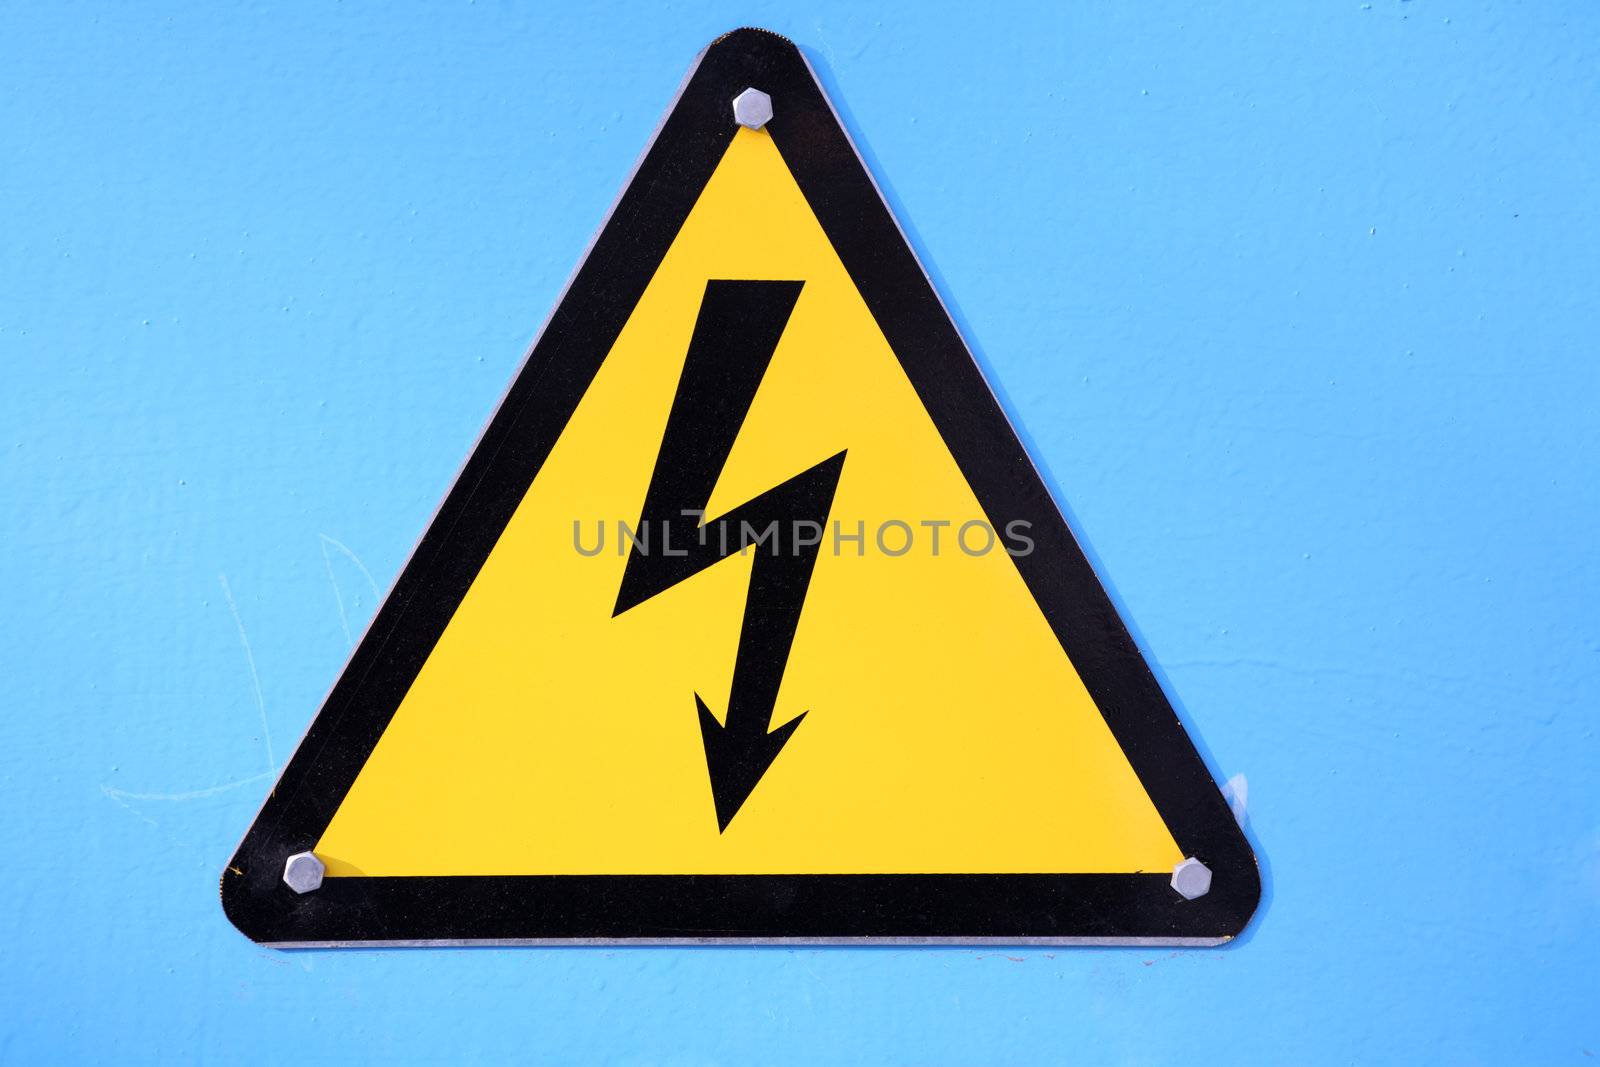 warning sign showing high voltage, focus point on center of photo